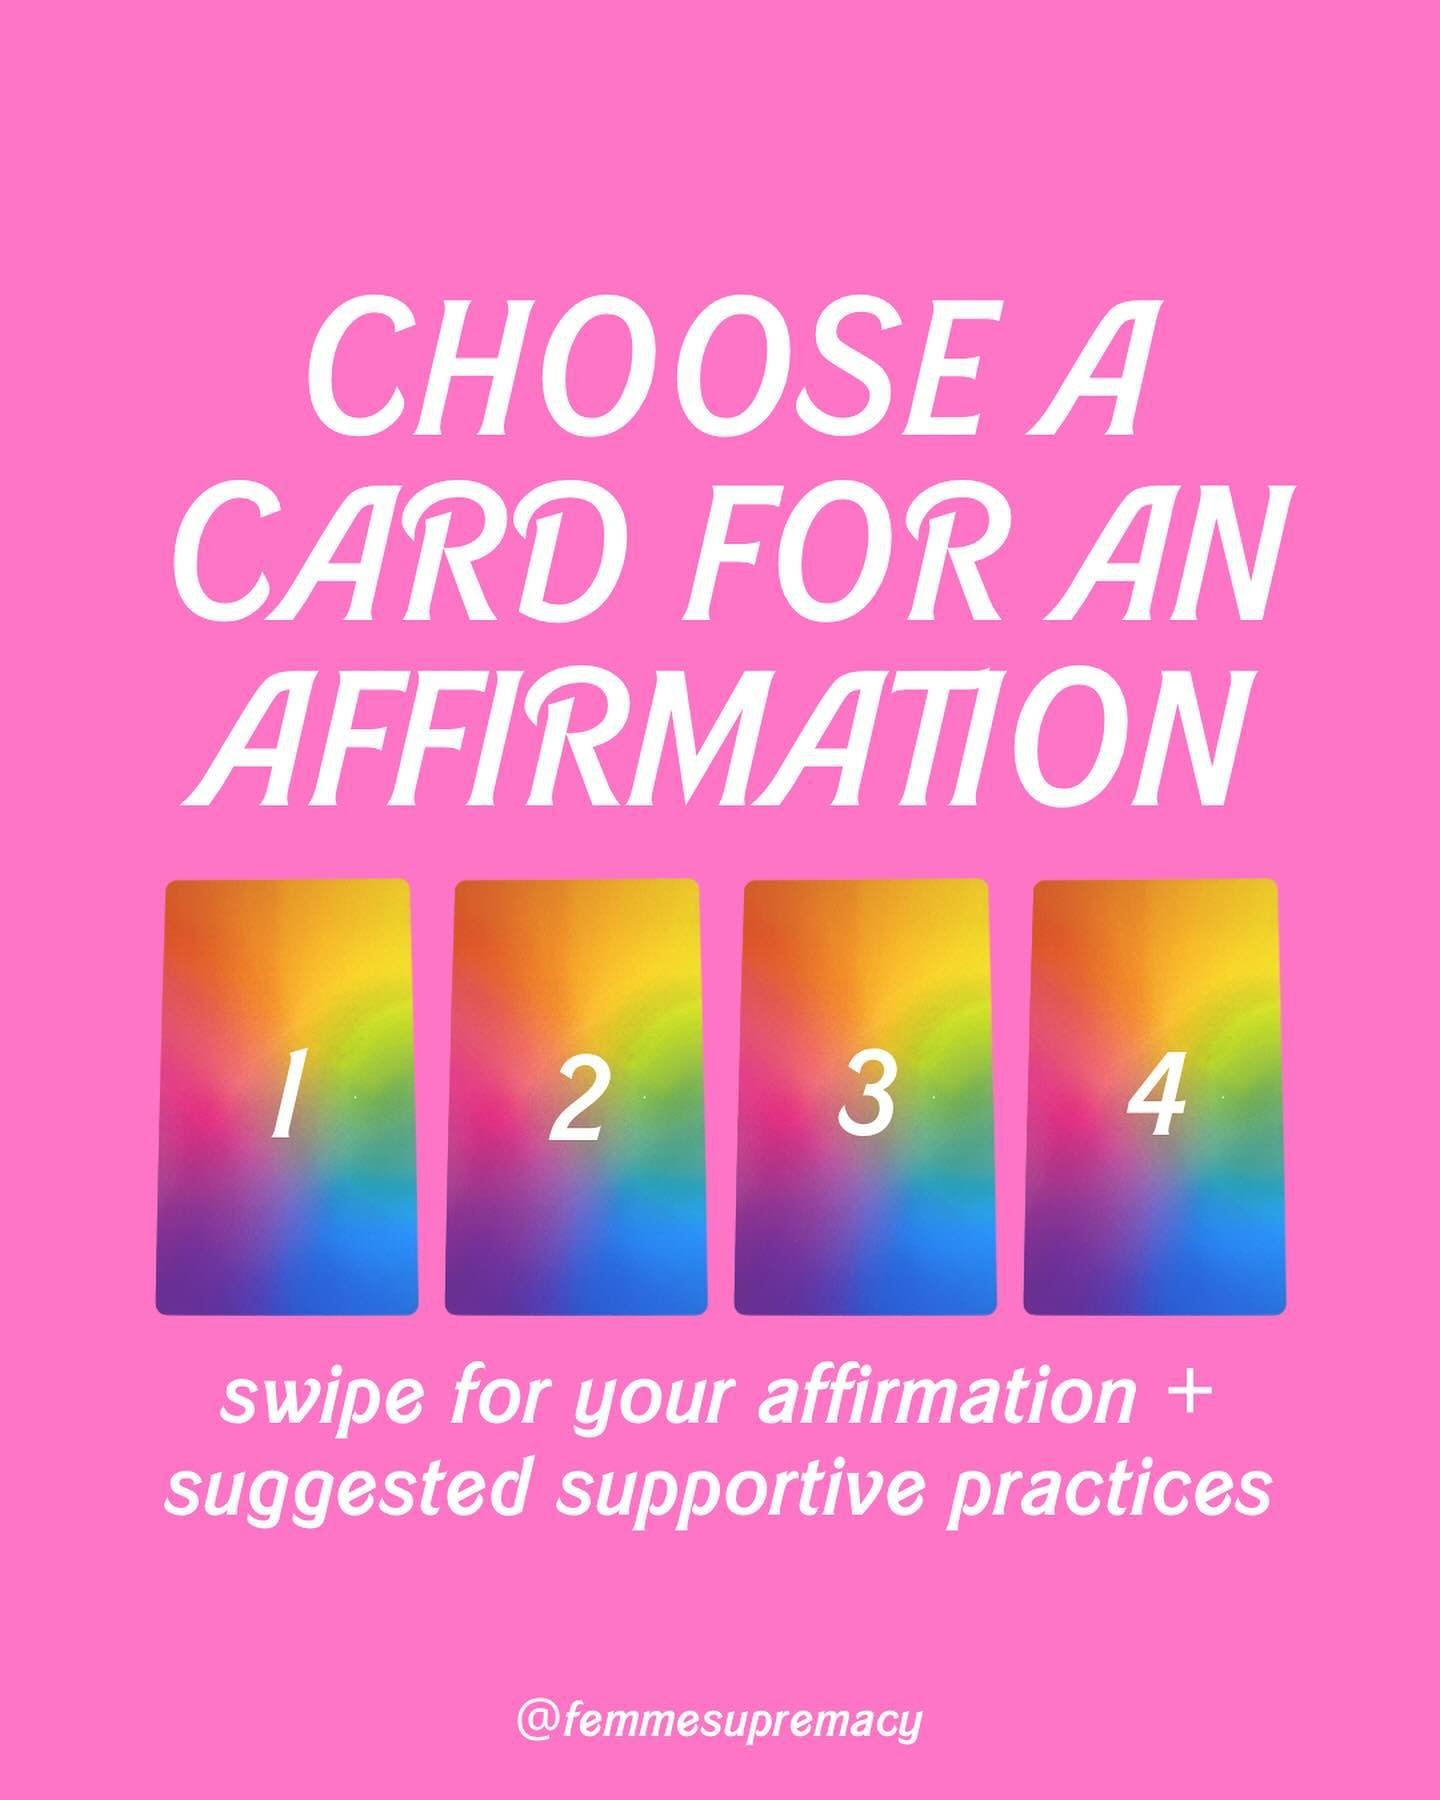 Choose a card &amp; then swipe for your affirmation + suggested supportive practices 💕

⚡

✨

💫

🧡&nbsp;If you chose card 1, your affirmation is NO IS A COMPLETE SENTENCE.

Suggested practices: Boundary work; practice saying no; tune into how your